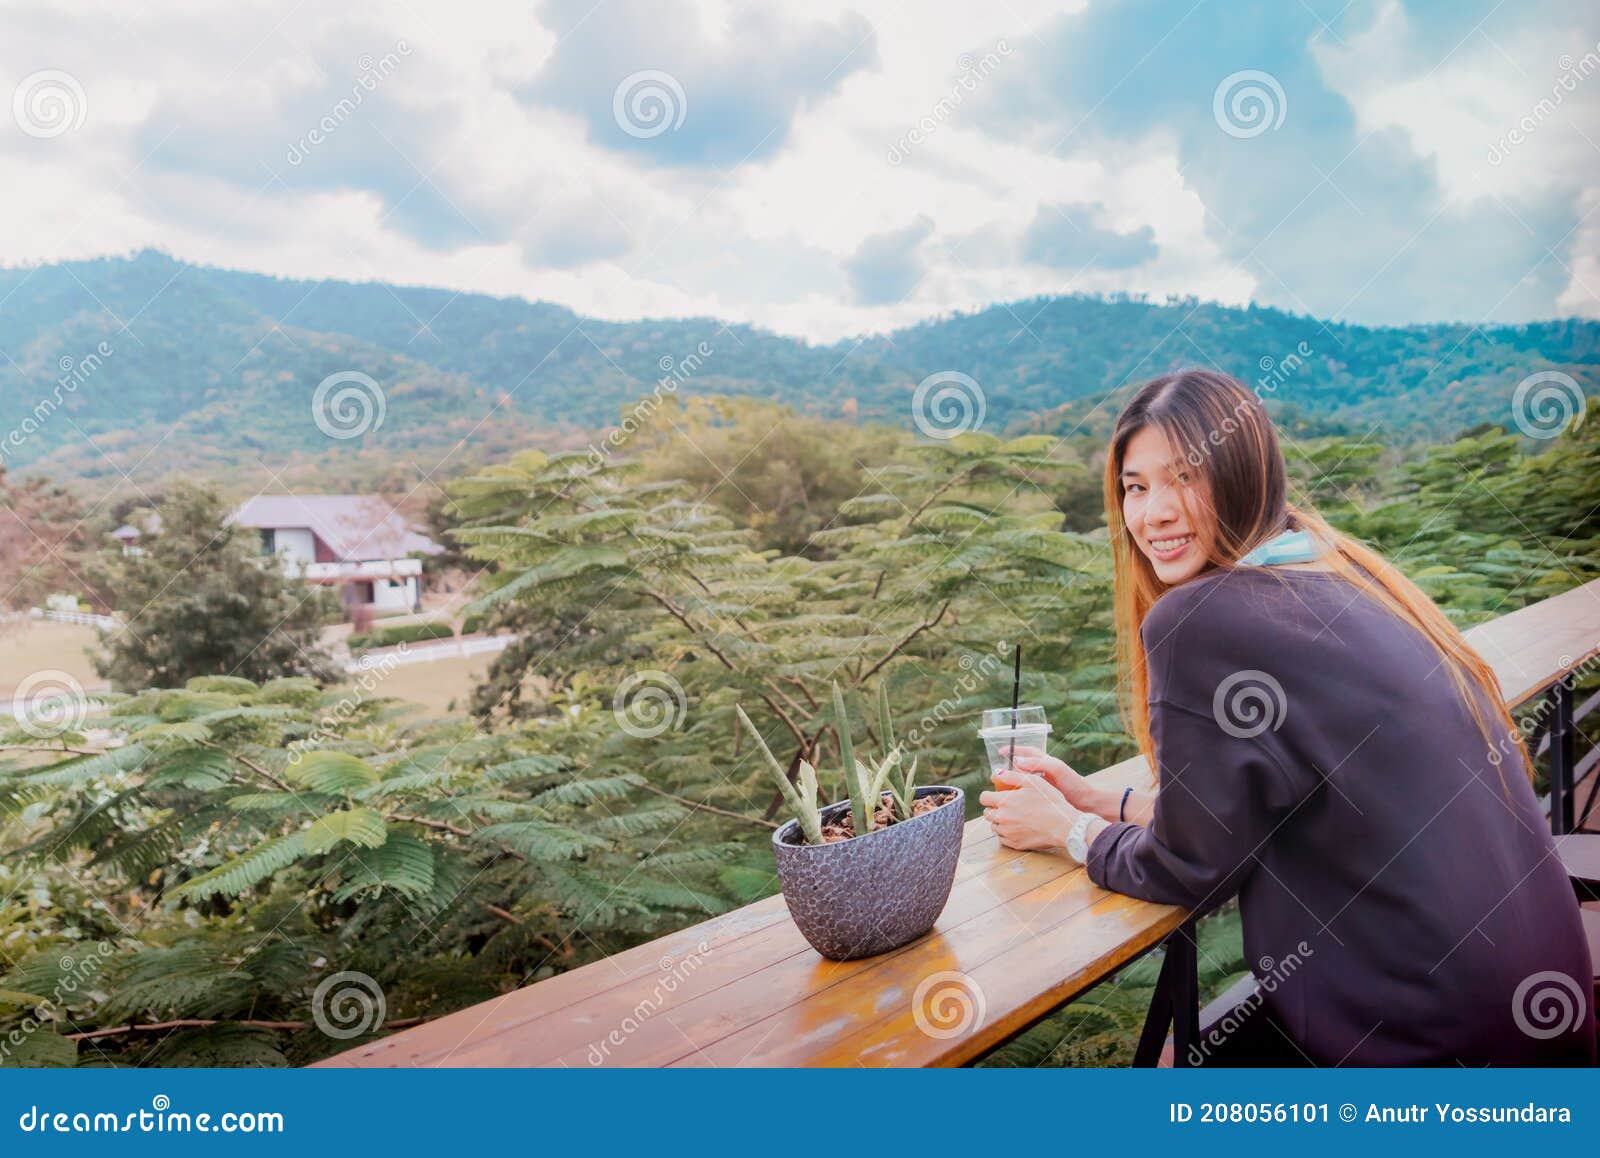 beauty young smiling female is sitting in cafe with forest and mountain nature background while drinking iced americano